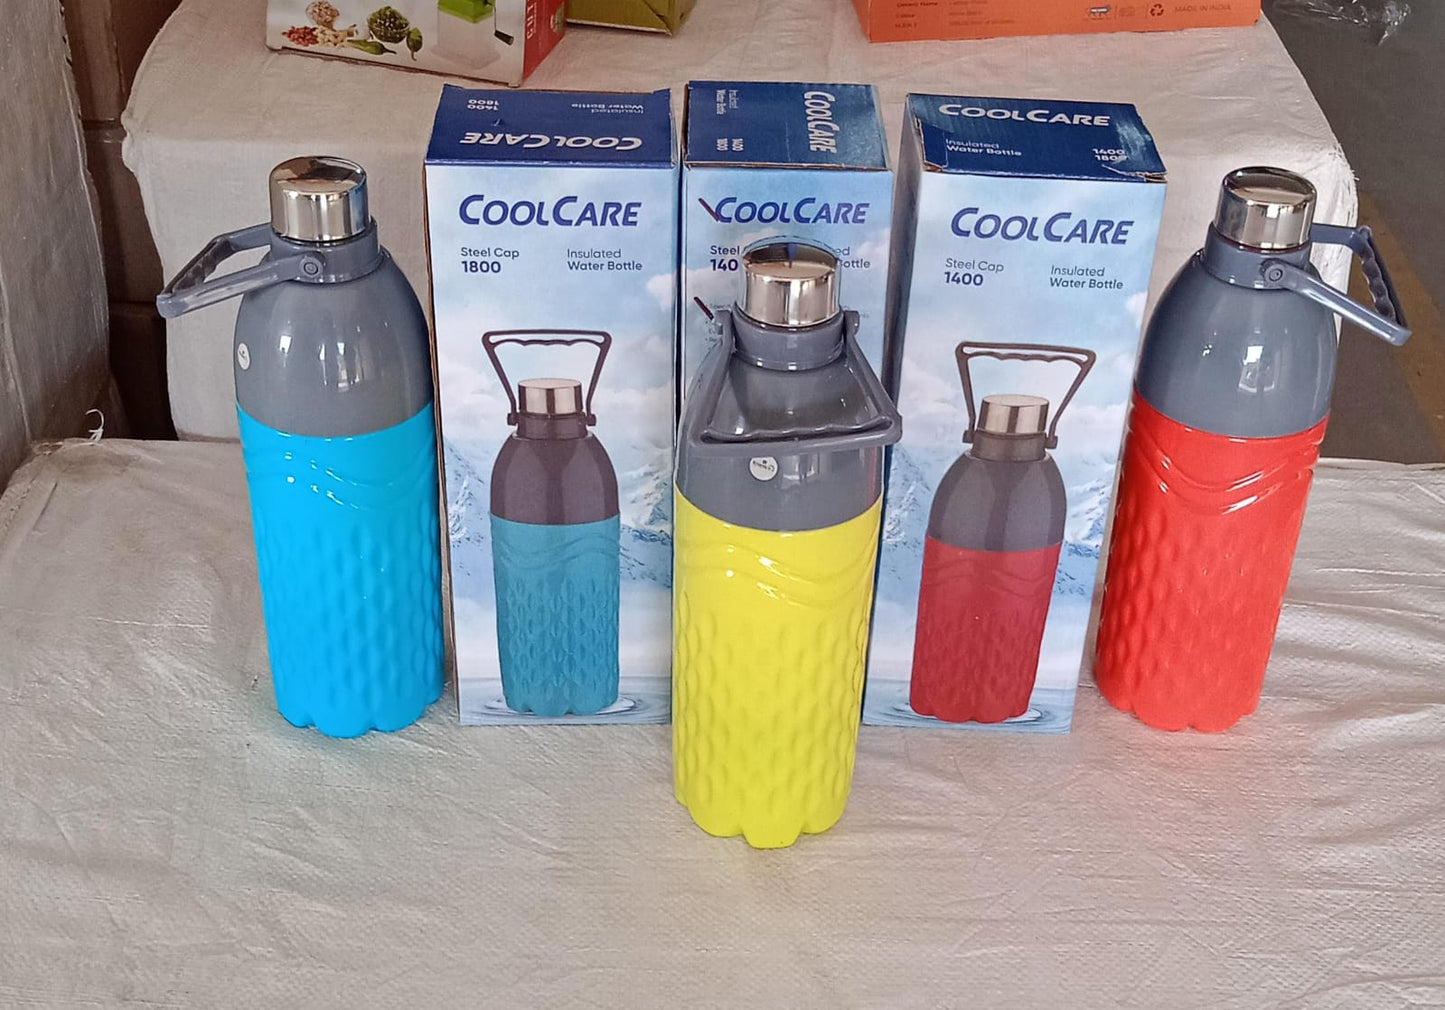 6215 Plastic Sports Insulated Water Bottle with Handle & Color Box Easy to Carry High Quality Water Bottle, BPA-Free & Leak-Proof! for Kids' School, For Fridge, Office, Sports, School, Gym, Yoga (1 Pc Mix Color 1800ML)